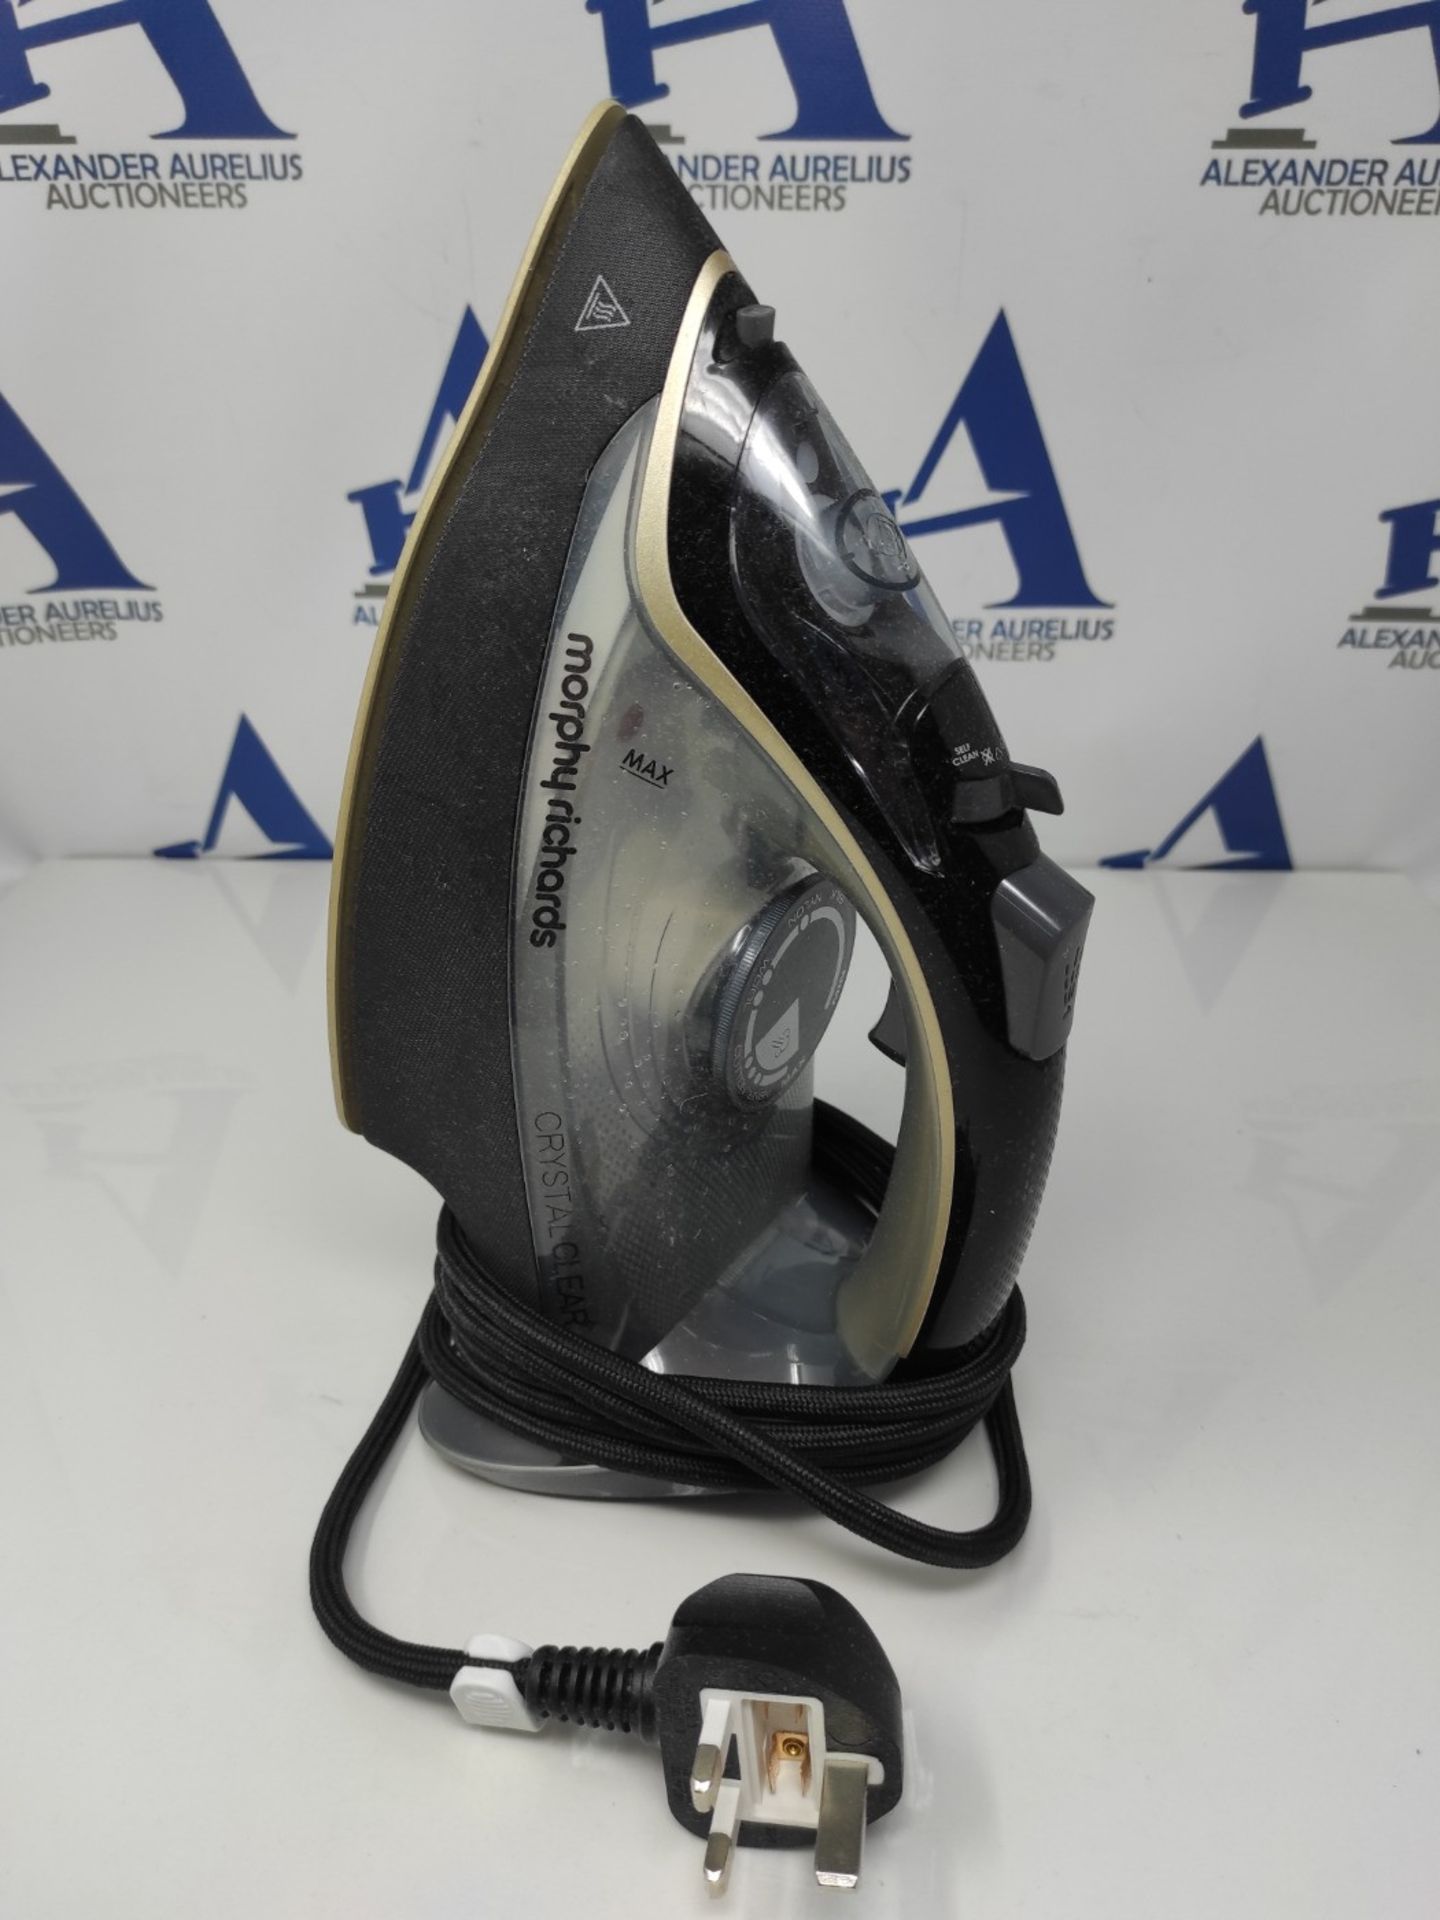 Morphy Richards Gold Crystal Clear Steam Iron - 35g Steam Output - 120g Steam Boost - - Image 2 of 3